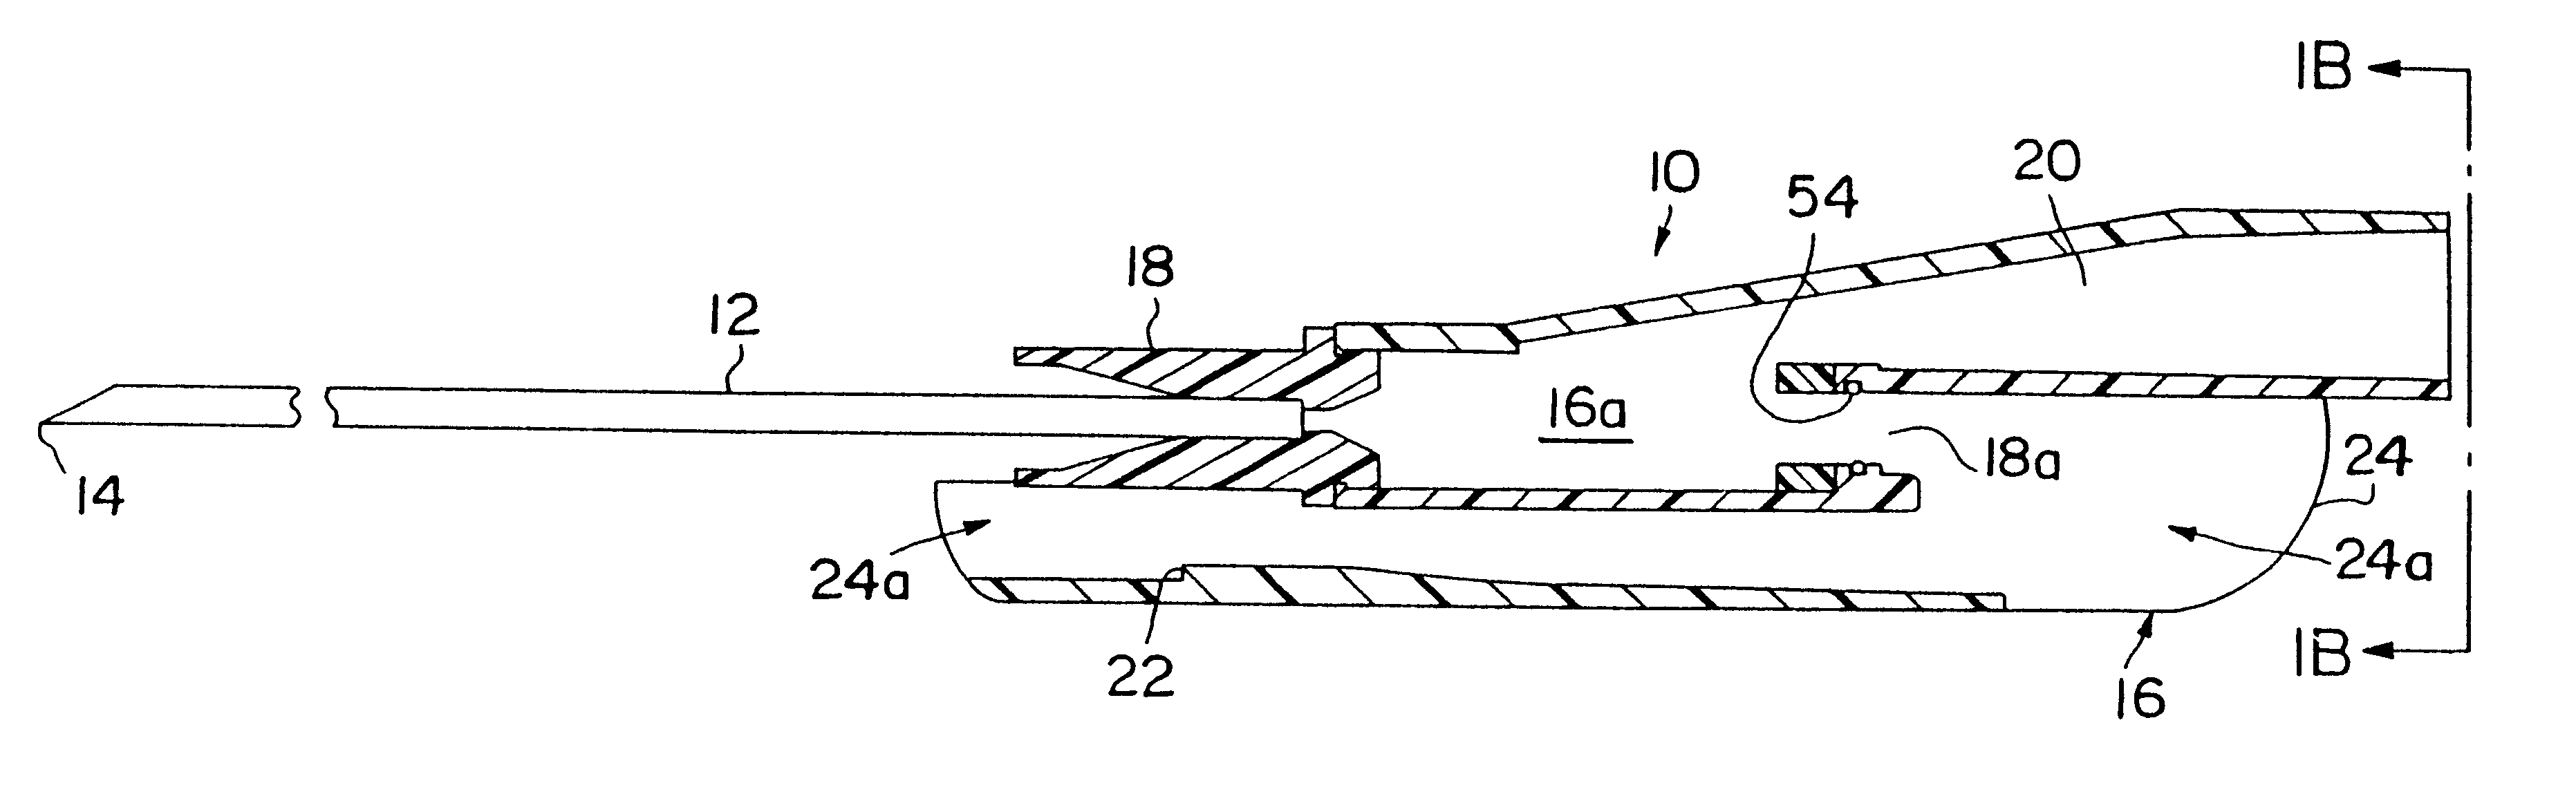 Releasable locking needle assembly with optional release accessory therefor